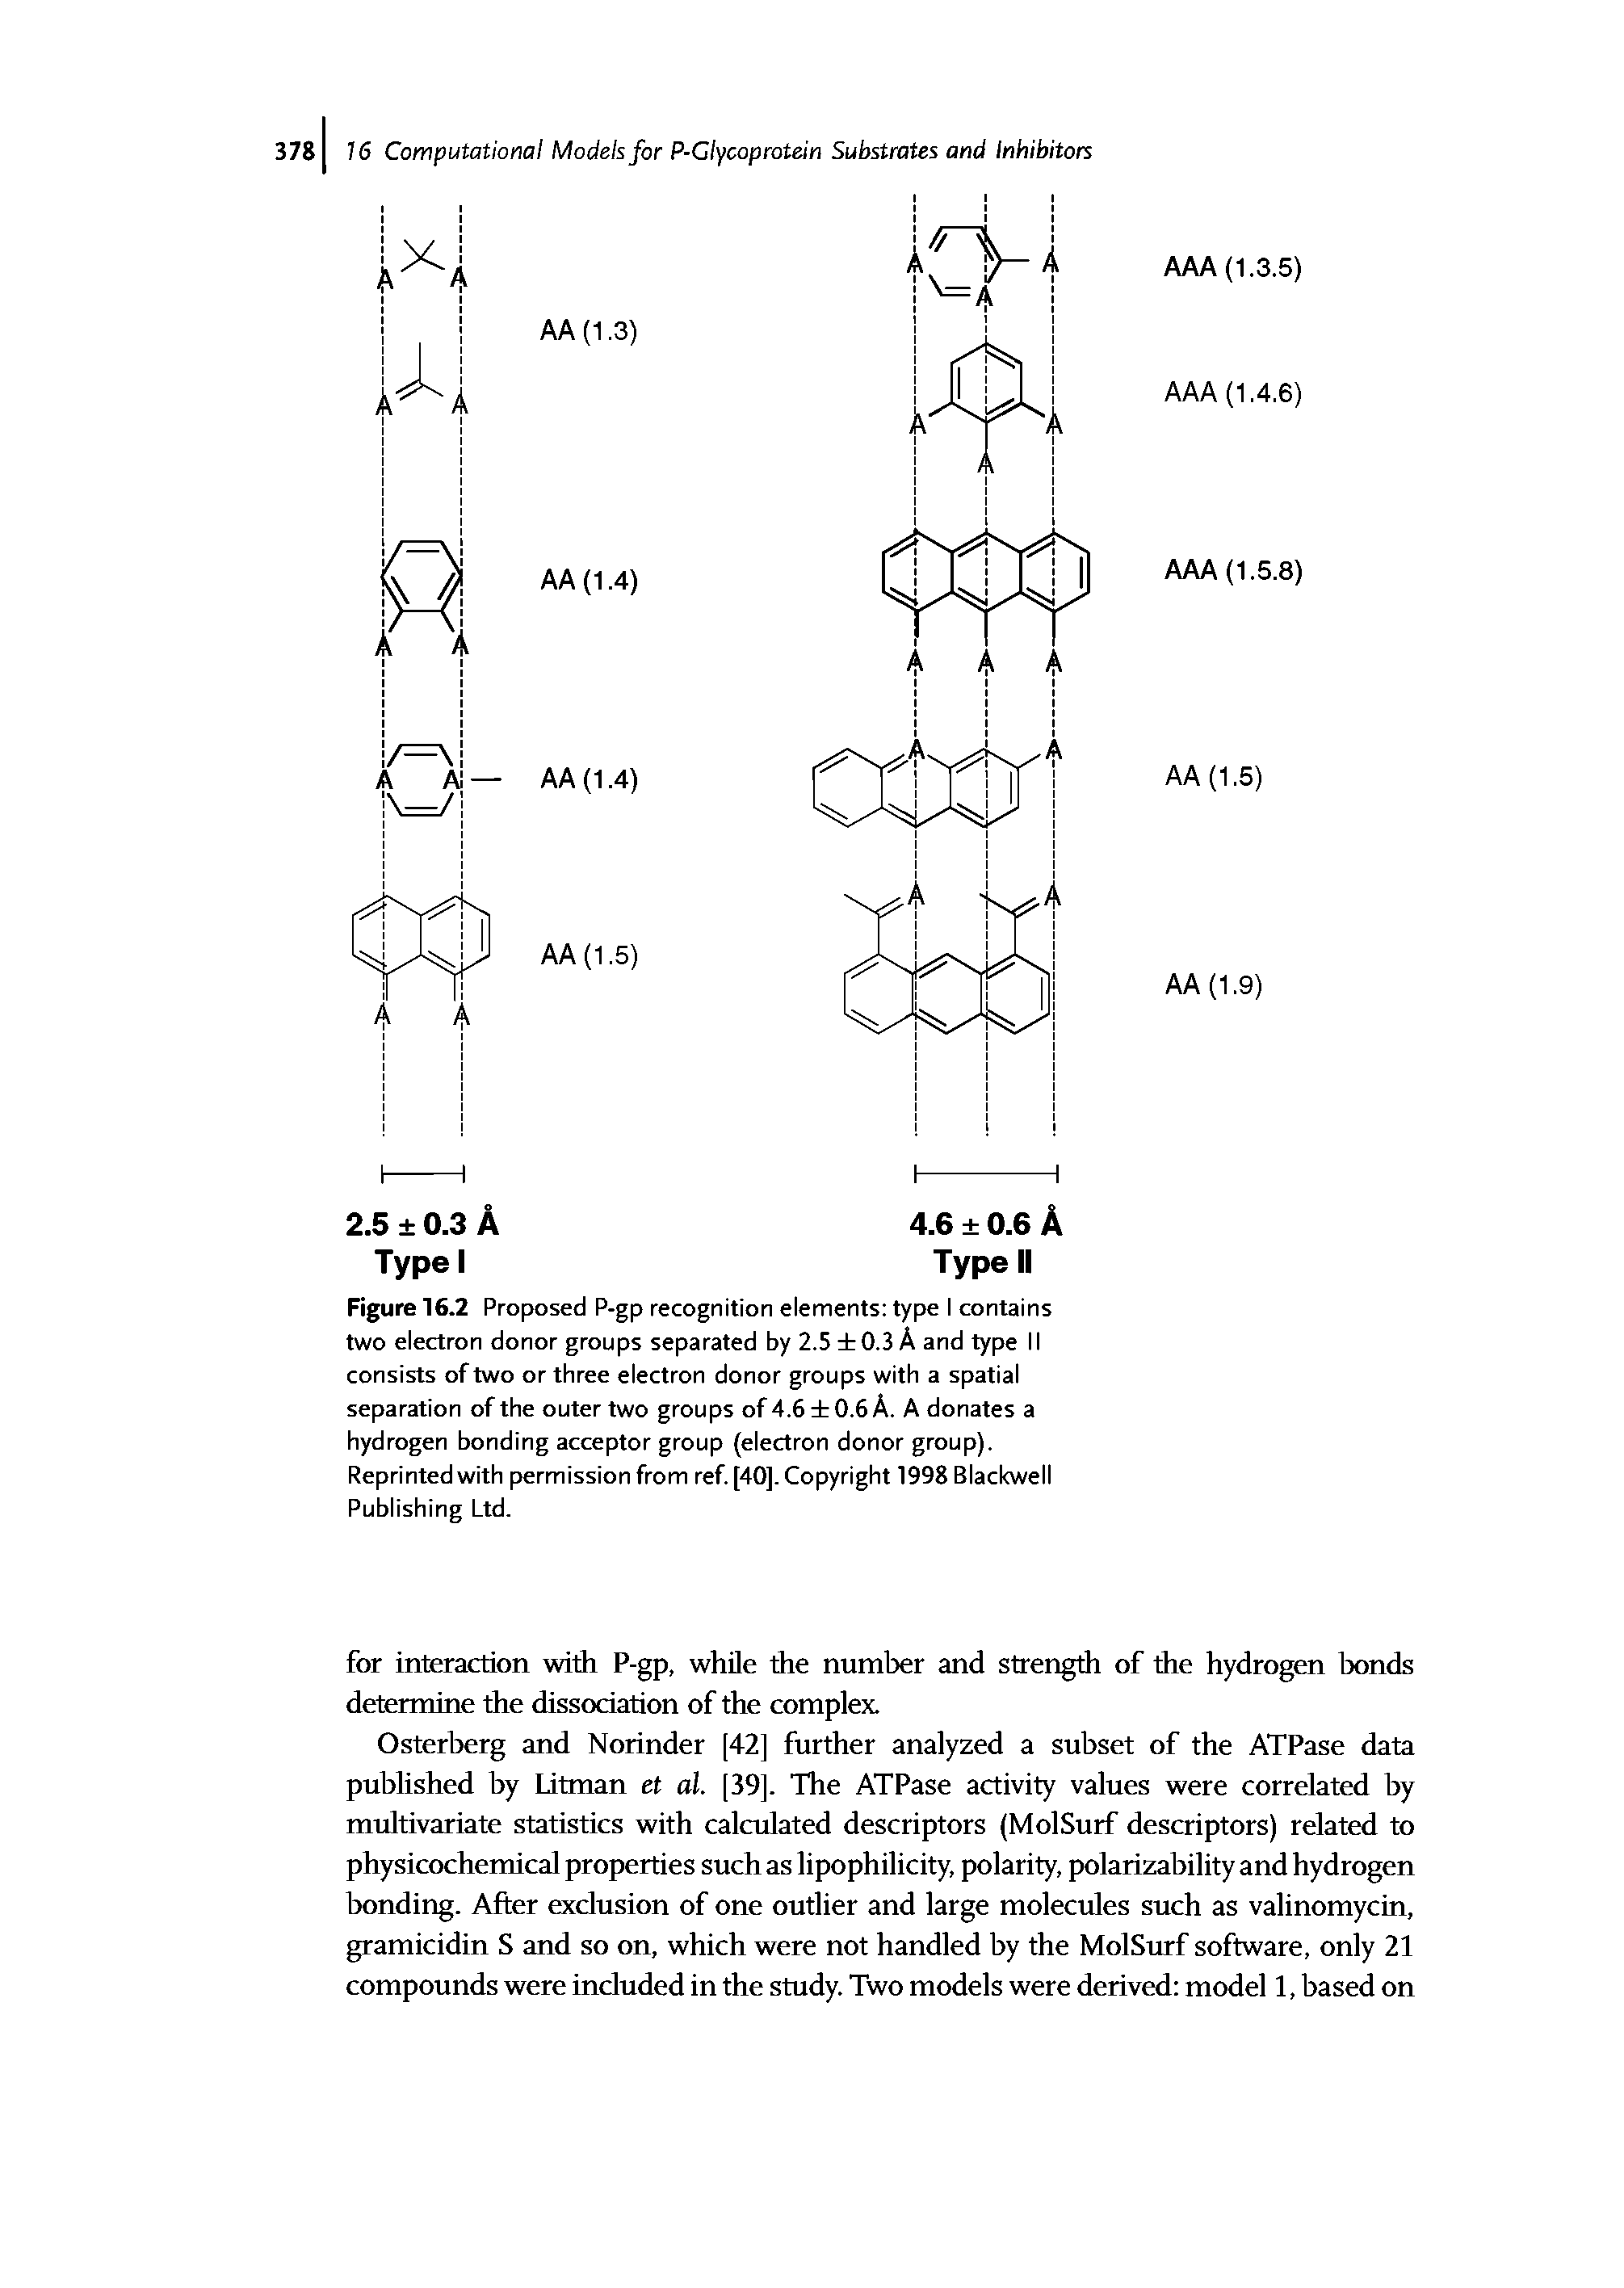 Figure 16.2 Proposed P-gp recognition elements type I contains two electron donor groups separated by 2.5 0.3 A and type II consists of two or three electron donor groups with a spatial separation of the outer two groups of 4.6 0.6 A. A donates a hydrogen bonding acceptor group (electron donor group). Reprinted with permission from ref. [40], Copyright 1998 Blackwell Publishing Ltd.